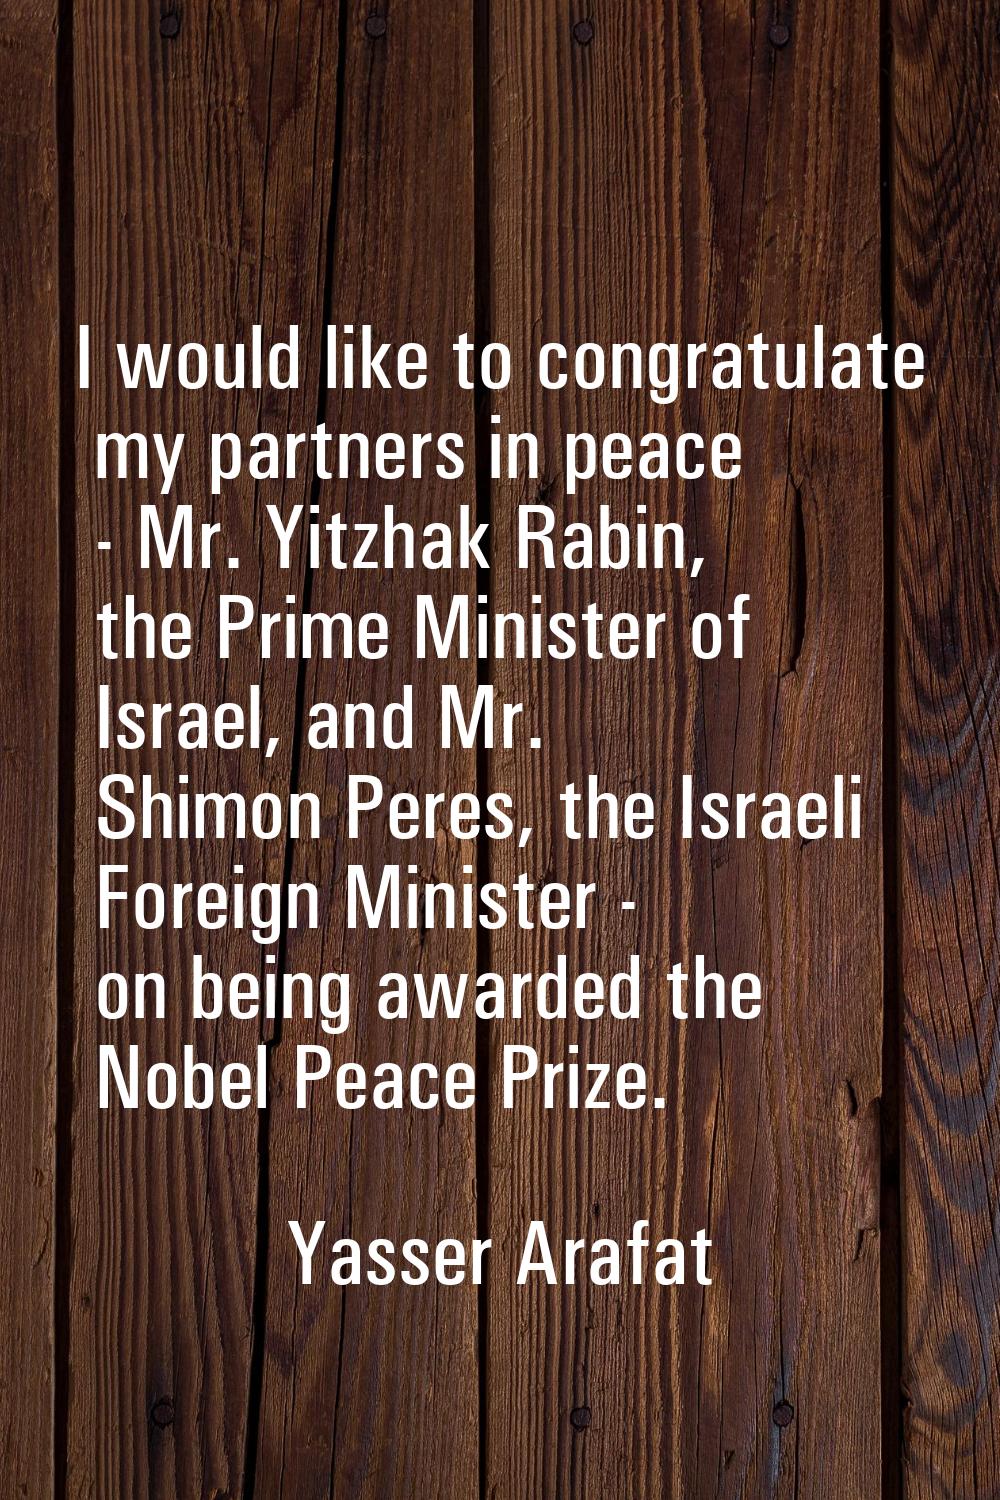 I would like to congratulate my partners in peace - Mr. Yitzhak Rabin, the Prime Minister of Israel